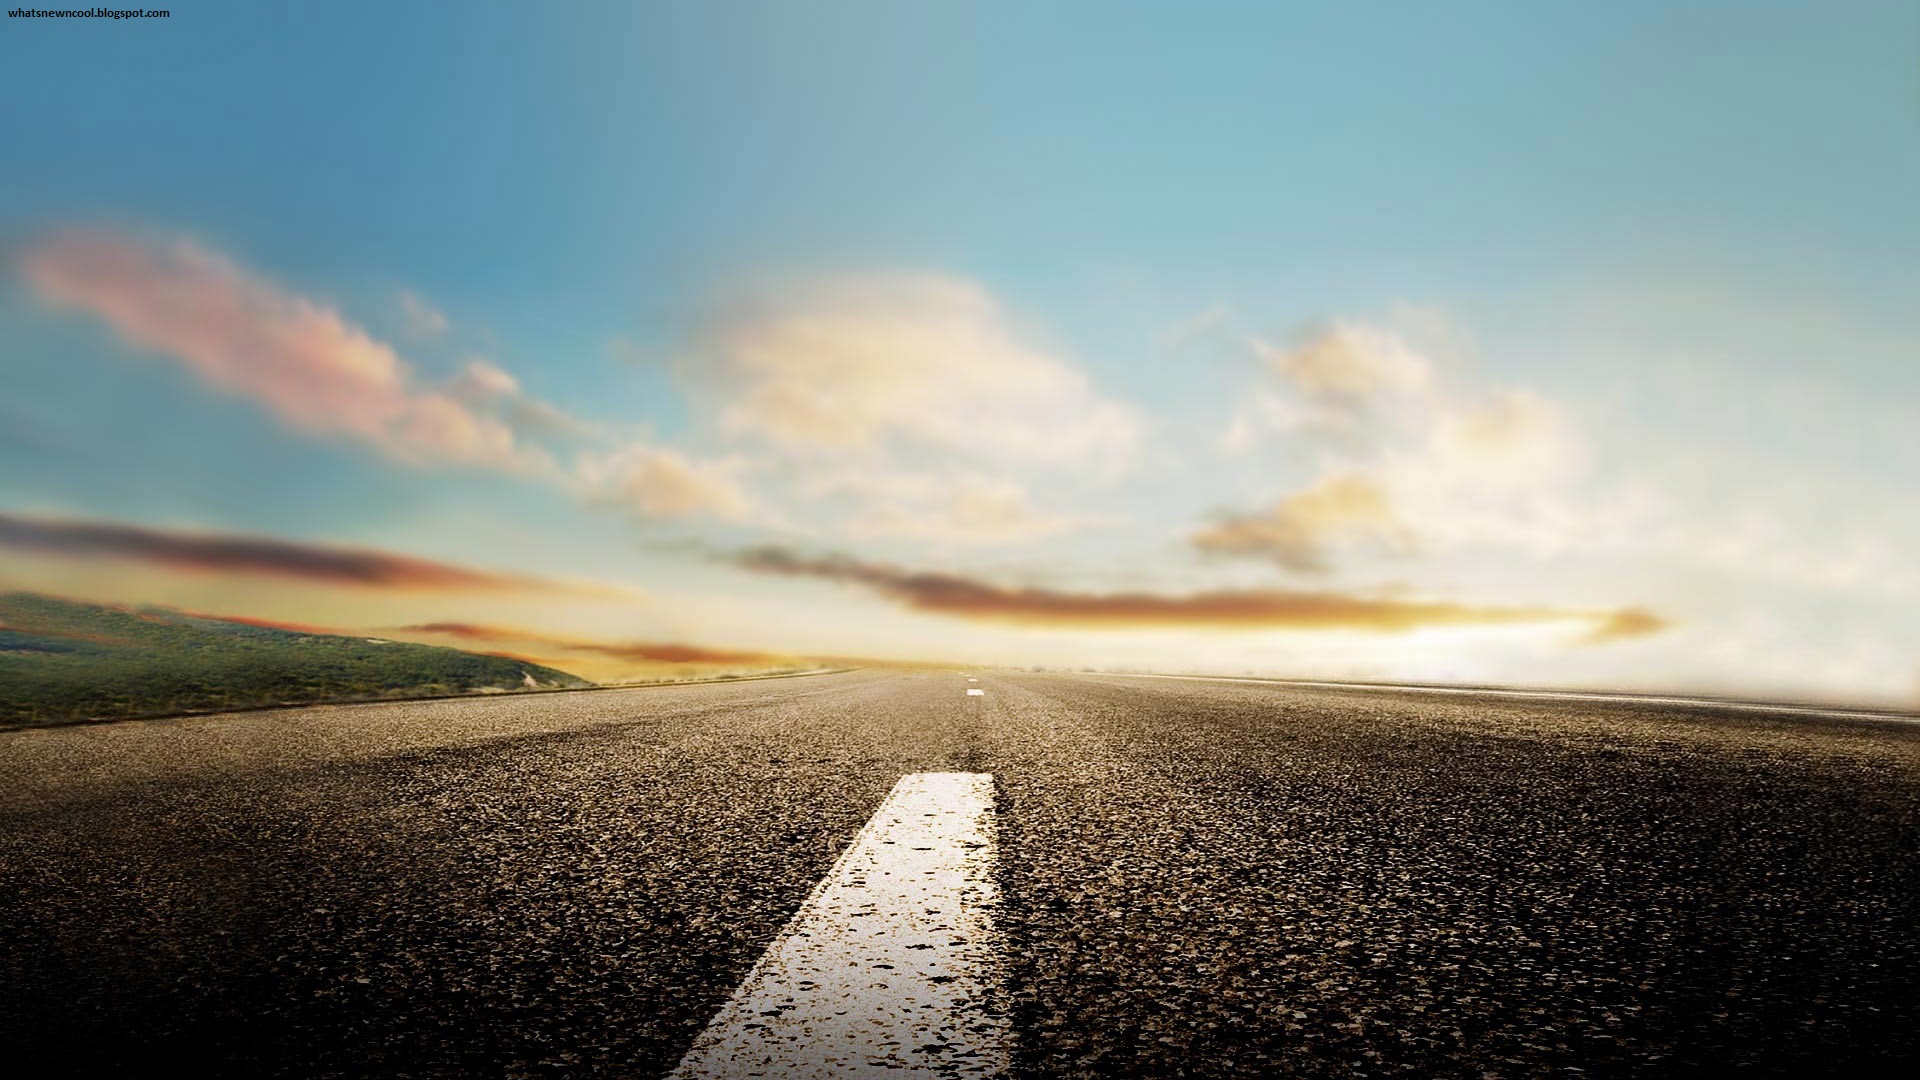 Road Facebook Background Wallpaper - Long Journey To Success - 1920x1080  Wallpaper 